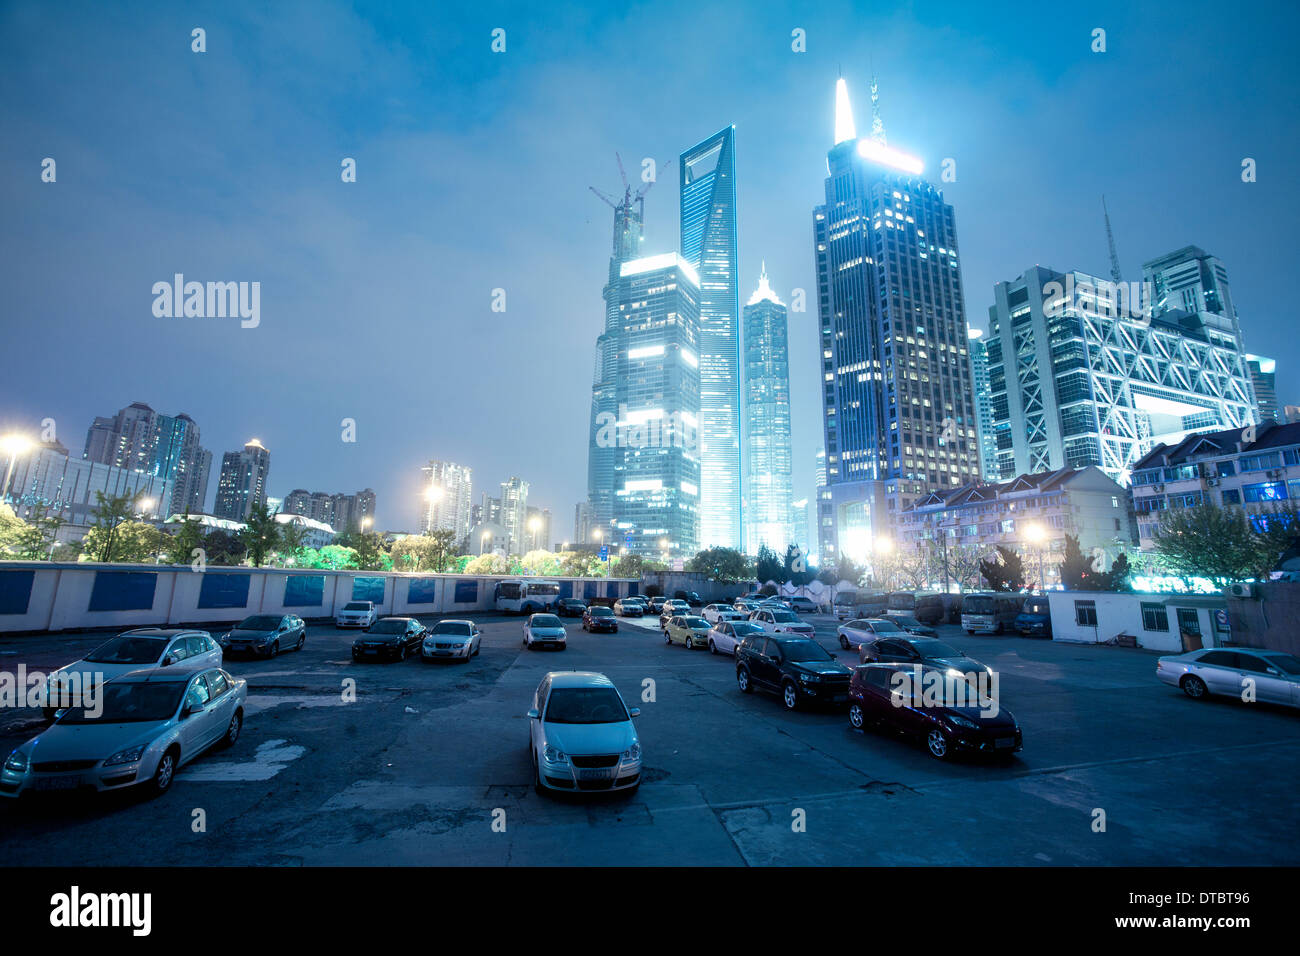 car parking lot in shanghai night view Stock Photo